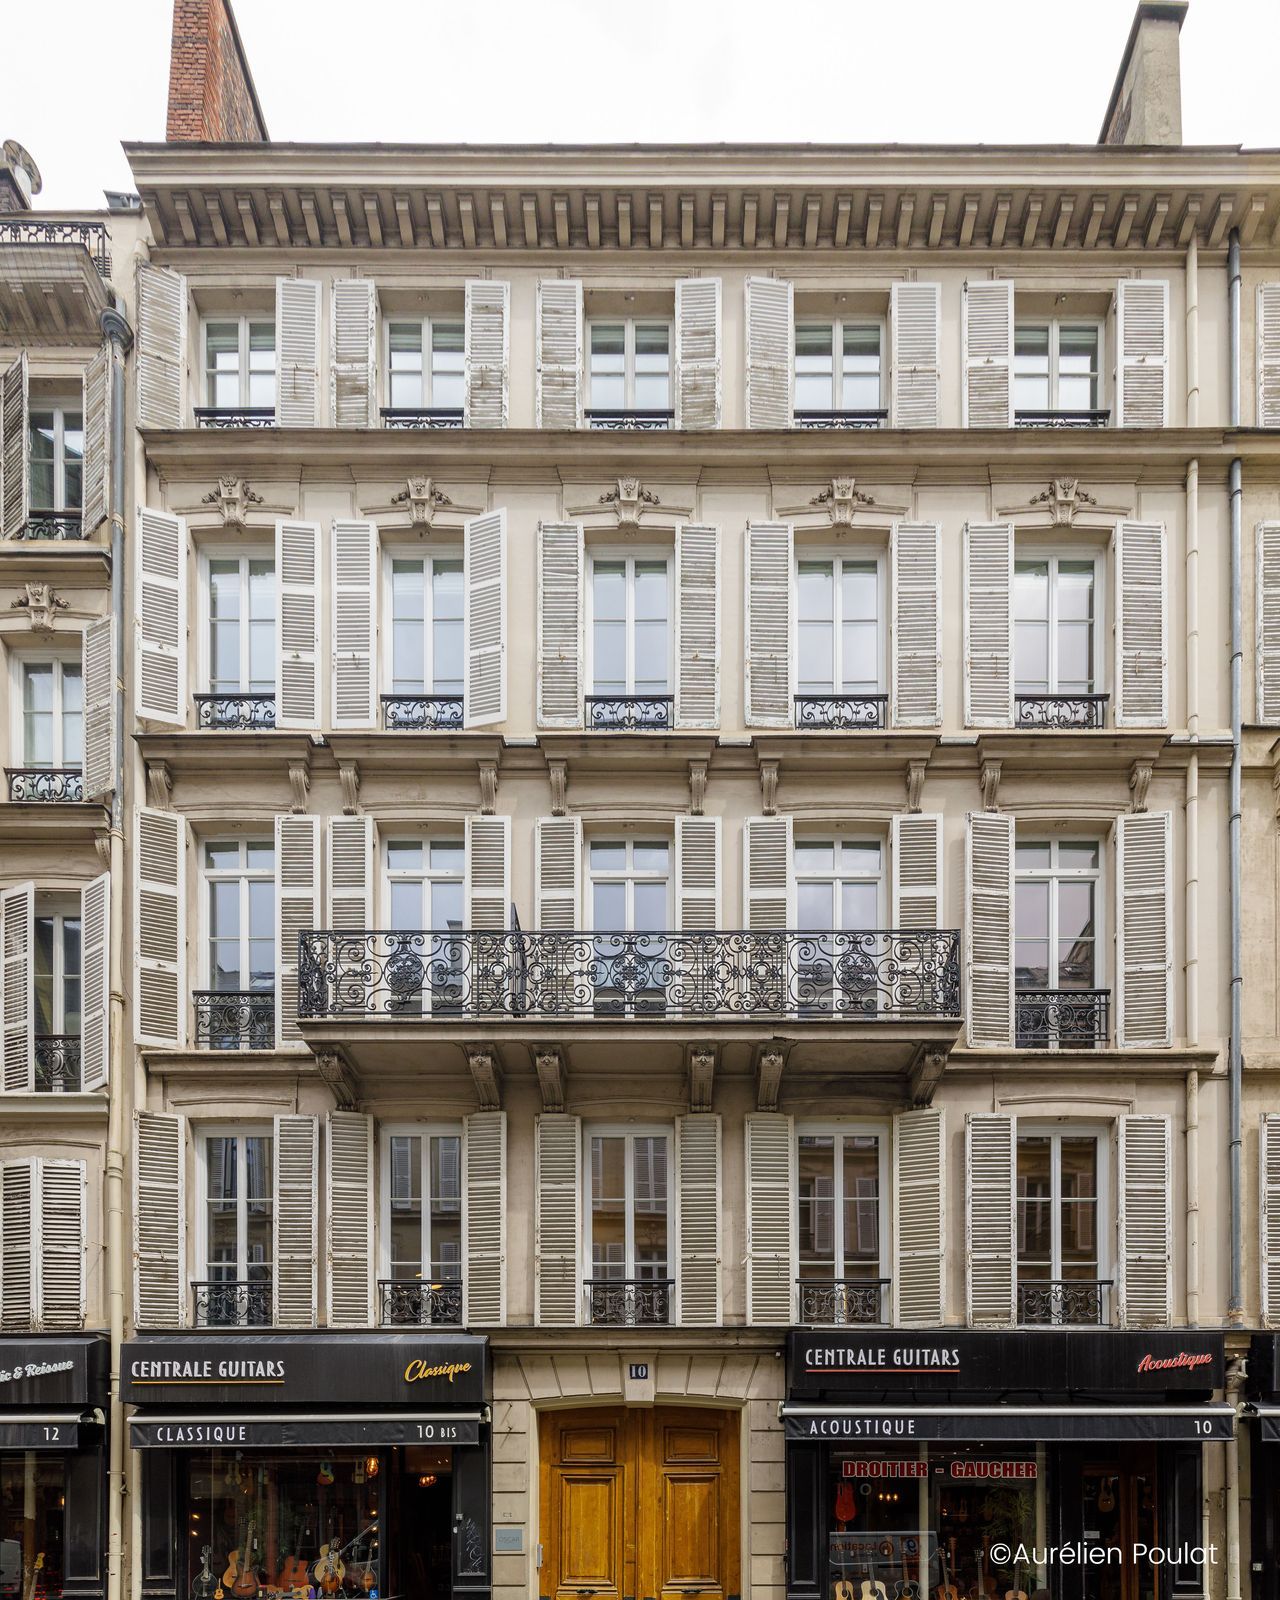 Modern 1-Bedroom Flat in the heart of Paris - Gym, Coworking, and Courtyard Access!